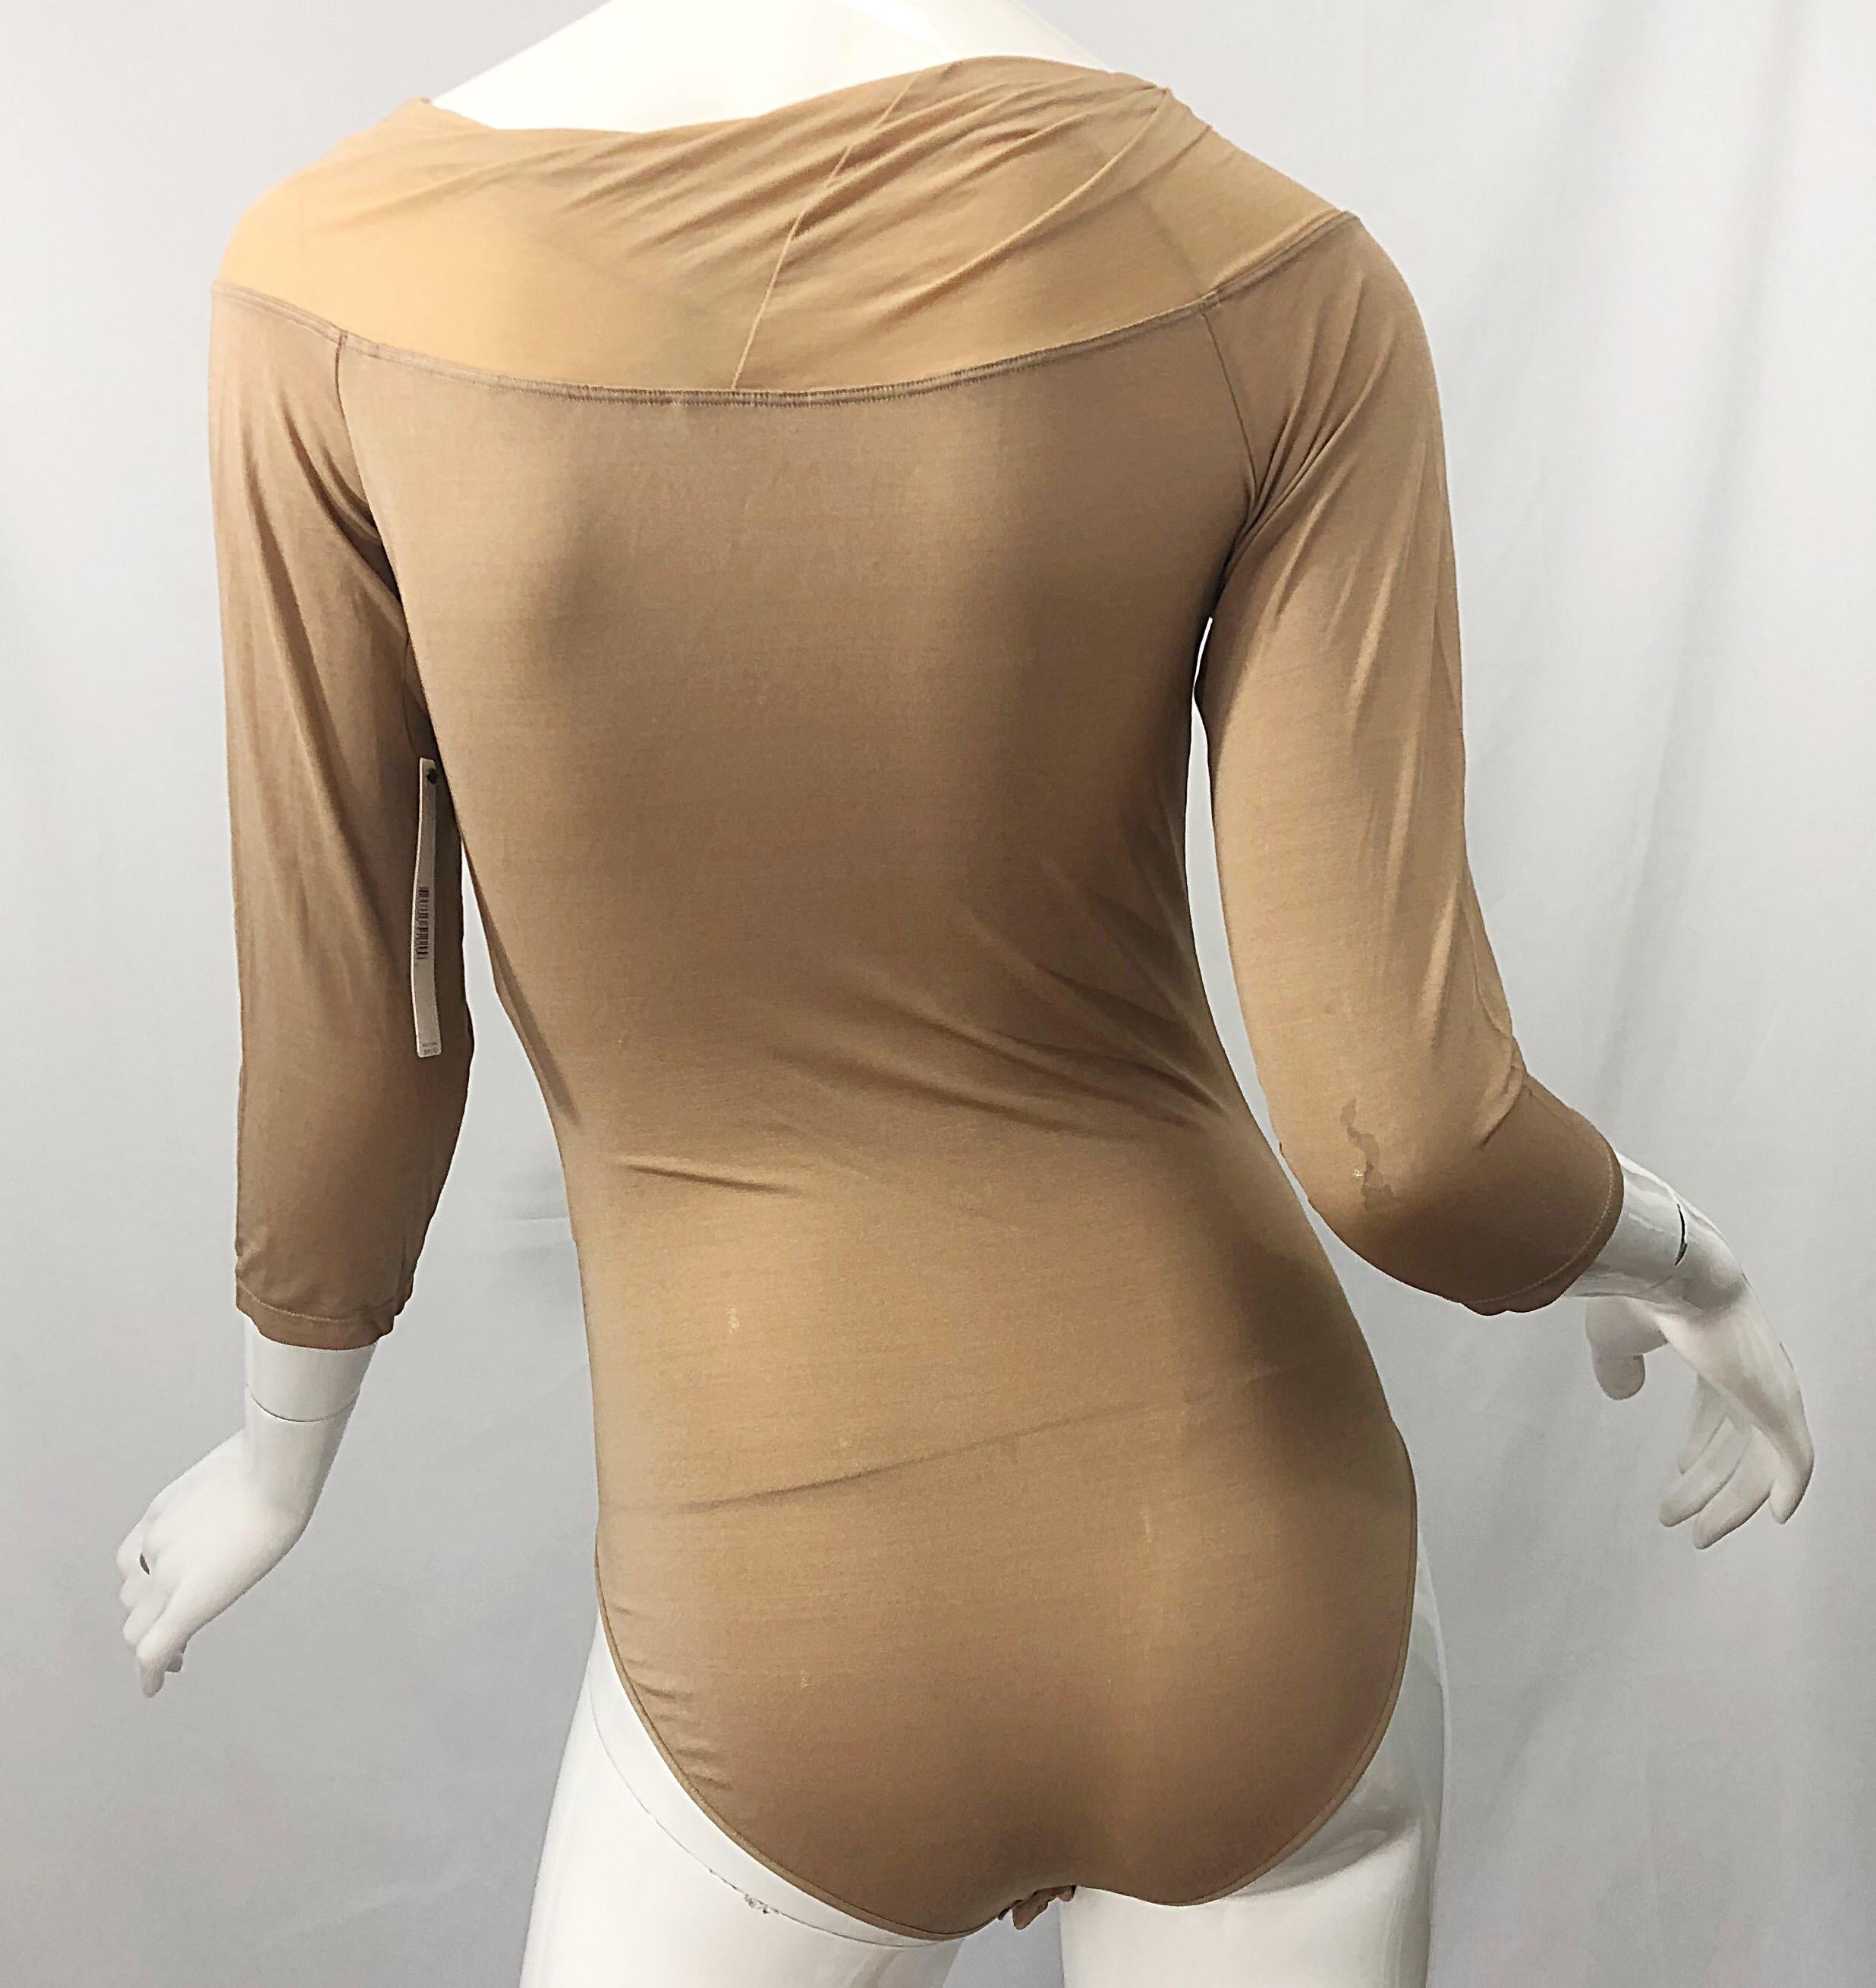 NWT $950 Donna Karan Collection 1990s Camel Nude 3/4 Sleeve One Piece Bodysuit M 4